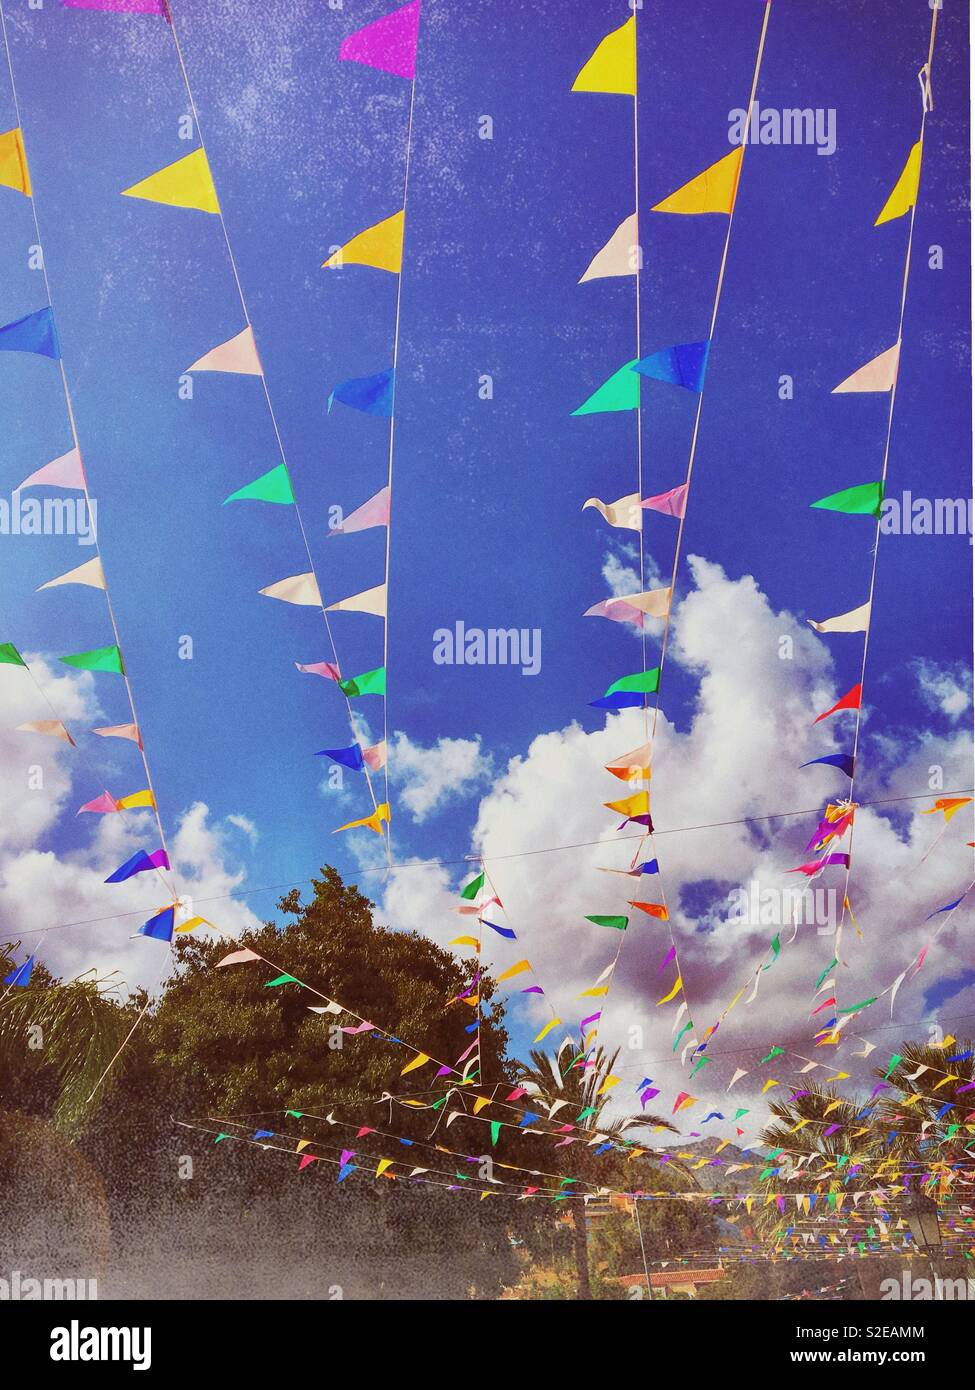 Colourful bunting flags against a Blue sky, province of Alicante, Costa Blanca Spain Stock Photo